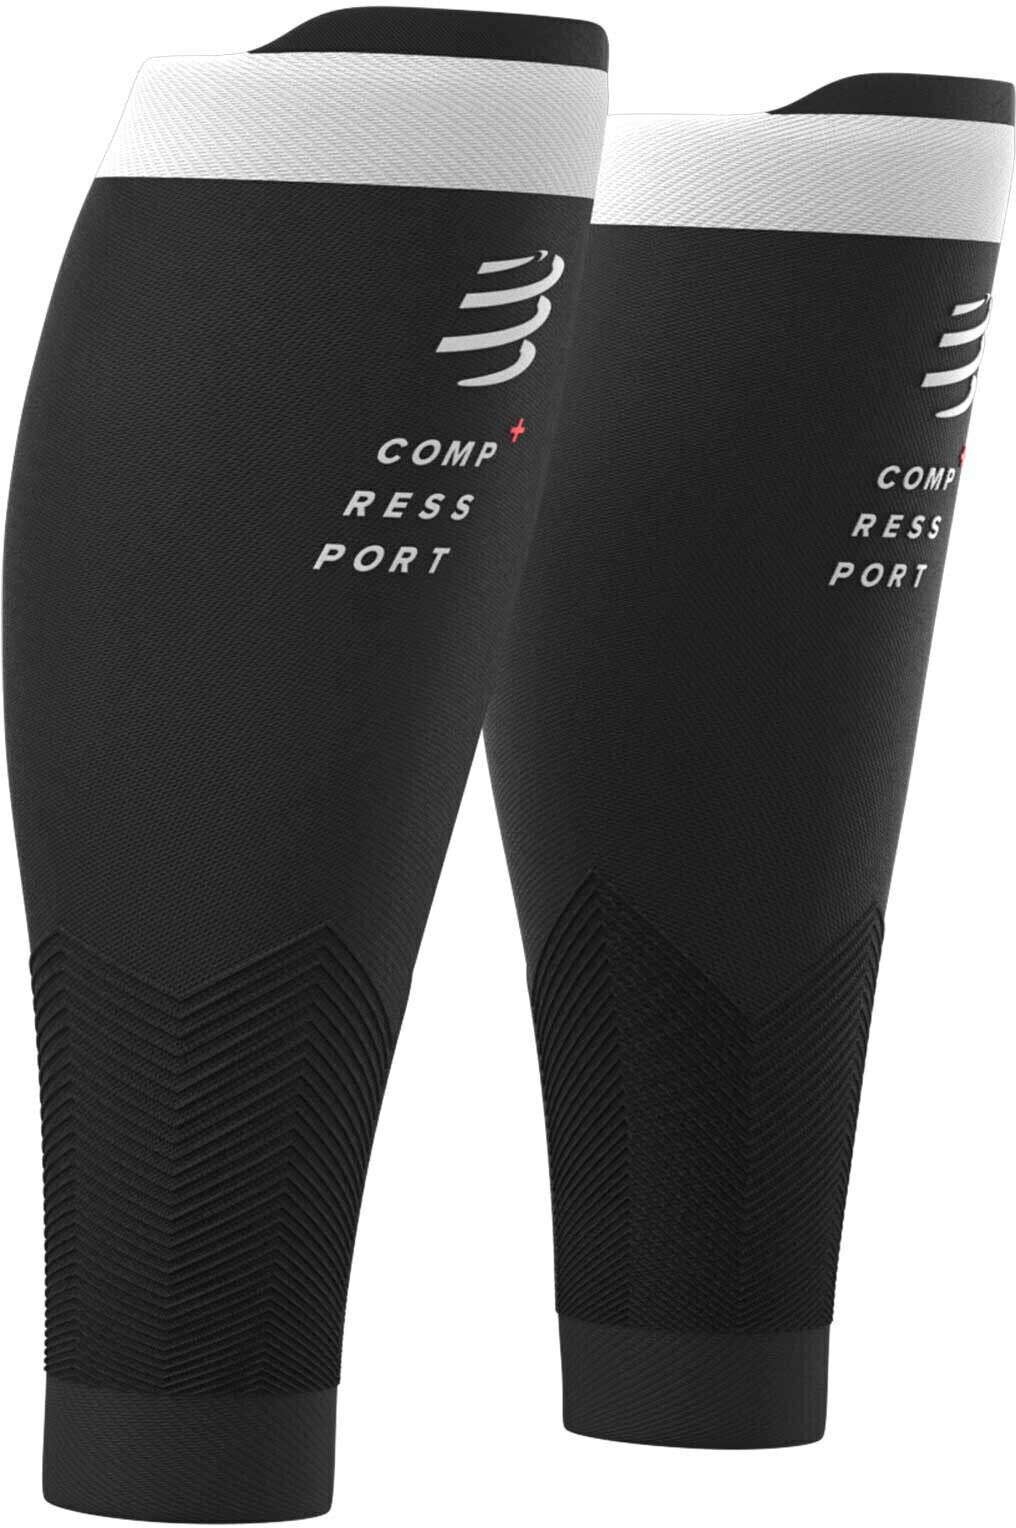 Calf covers for runners Compressport R2v2 Black T1 Calf covers for runners